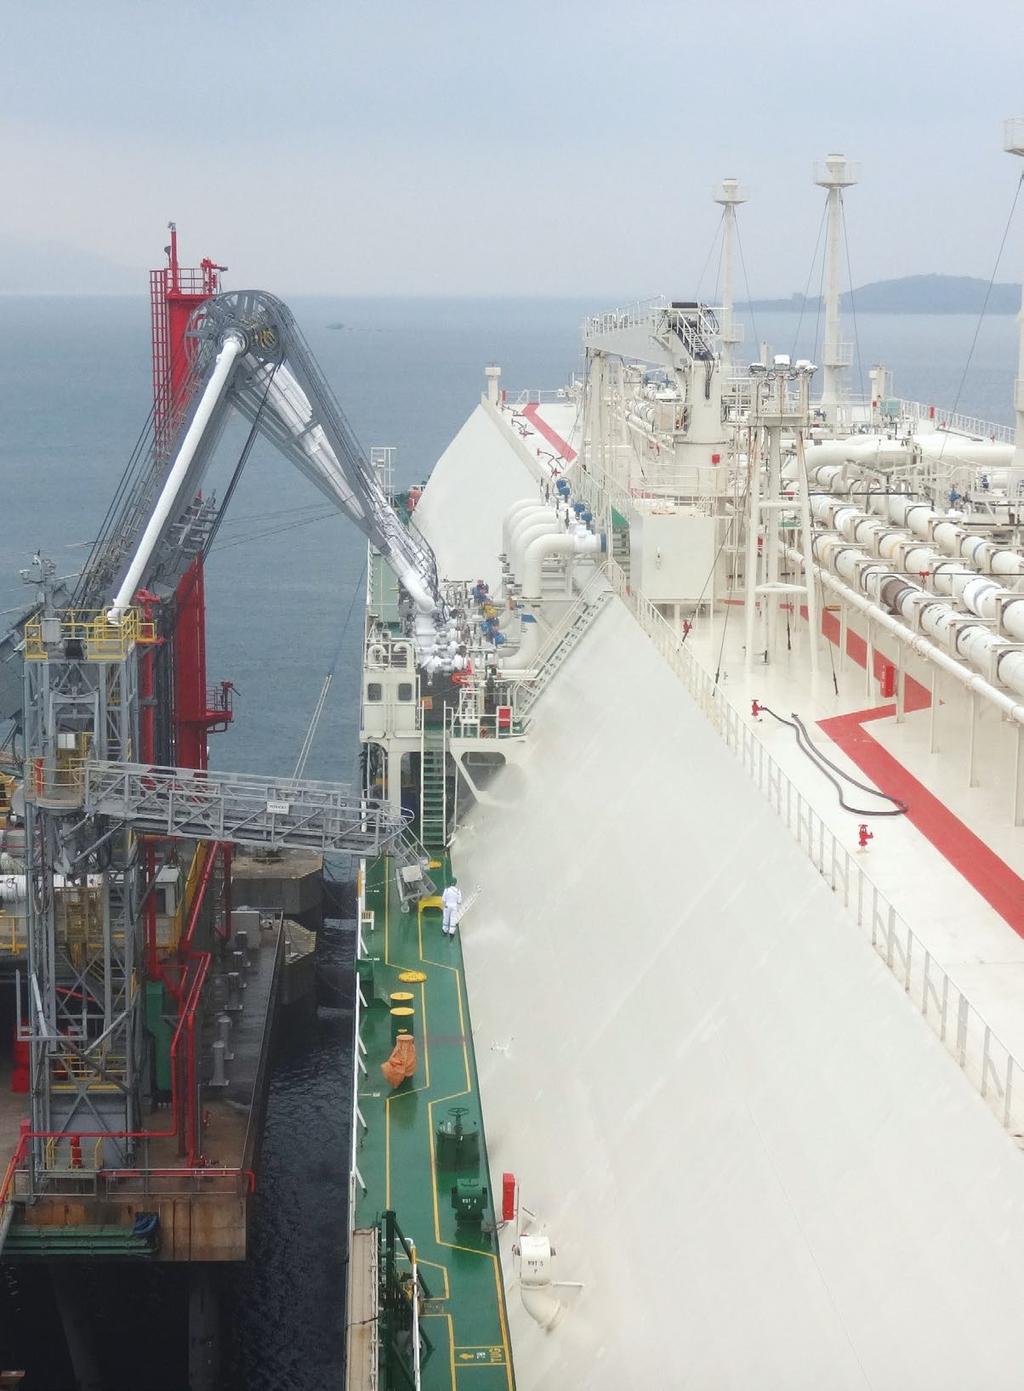 LNG CARRIERS Variables like boil off, dual or tri-fuel diesel-electric propulsion, and the operation of reliquefaction plants or gas combustion units are critical not just for efficiency, but also